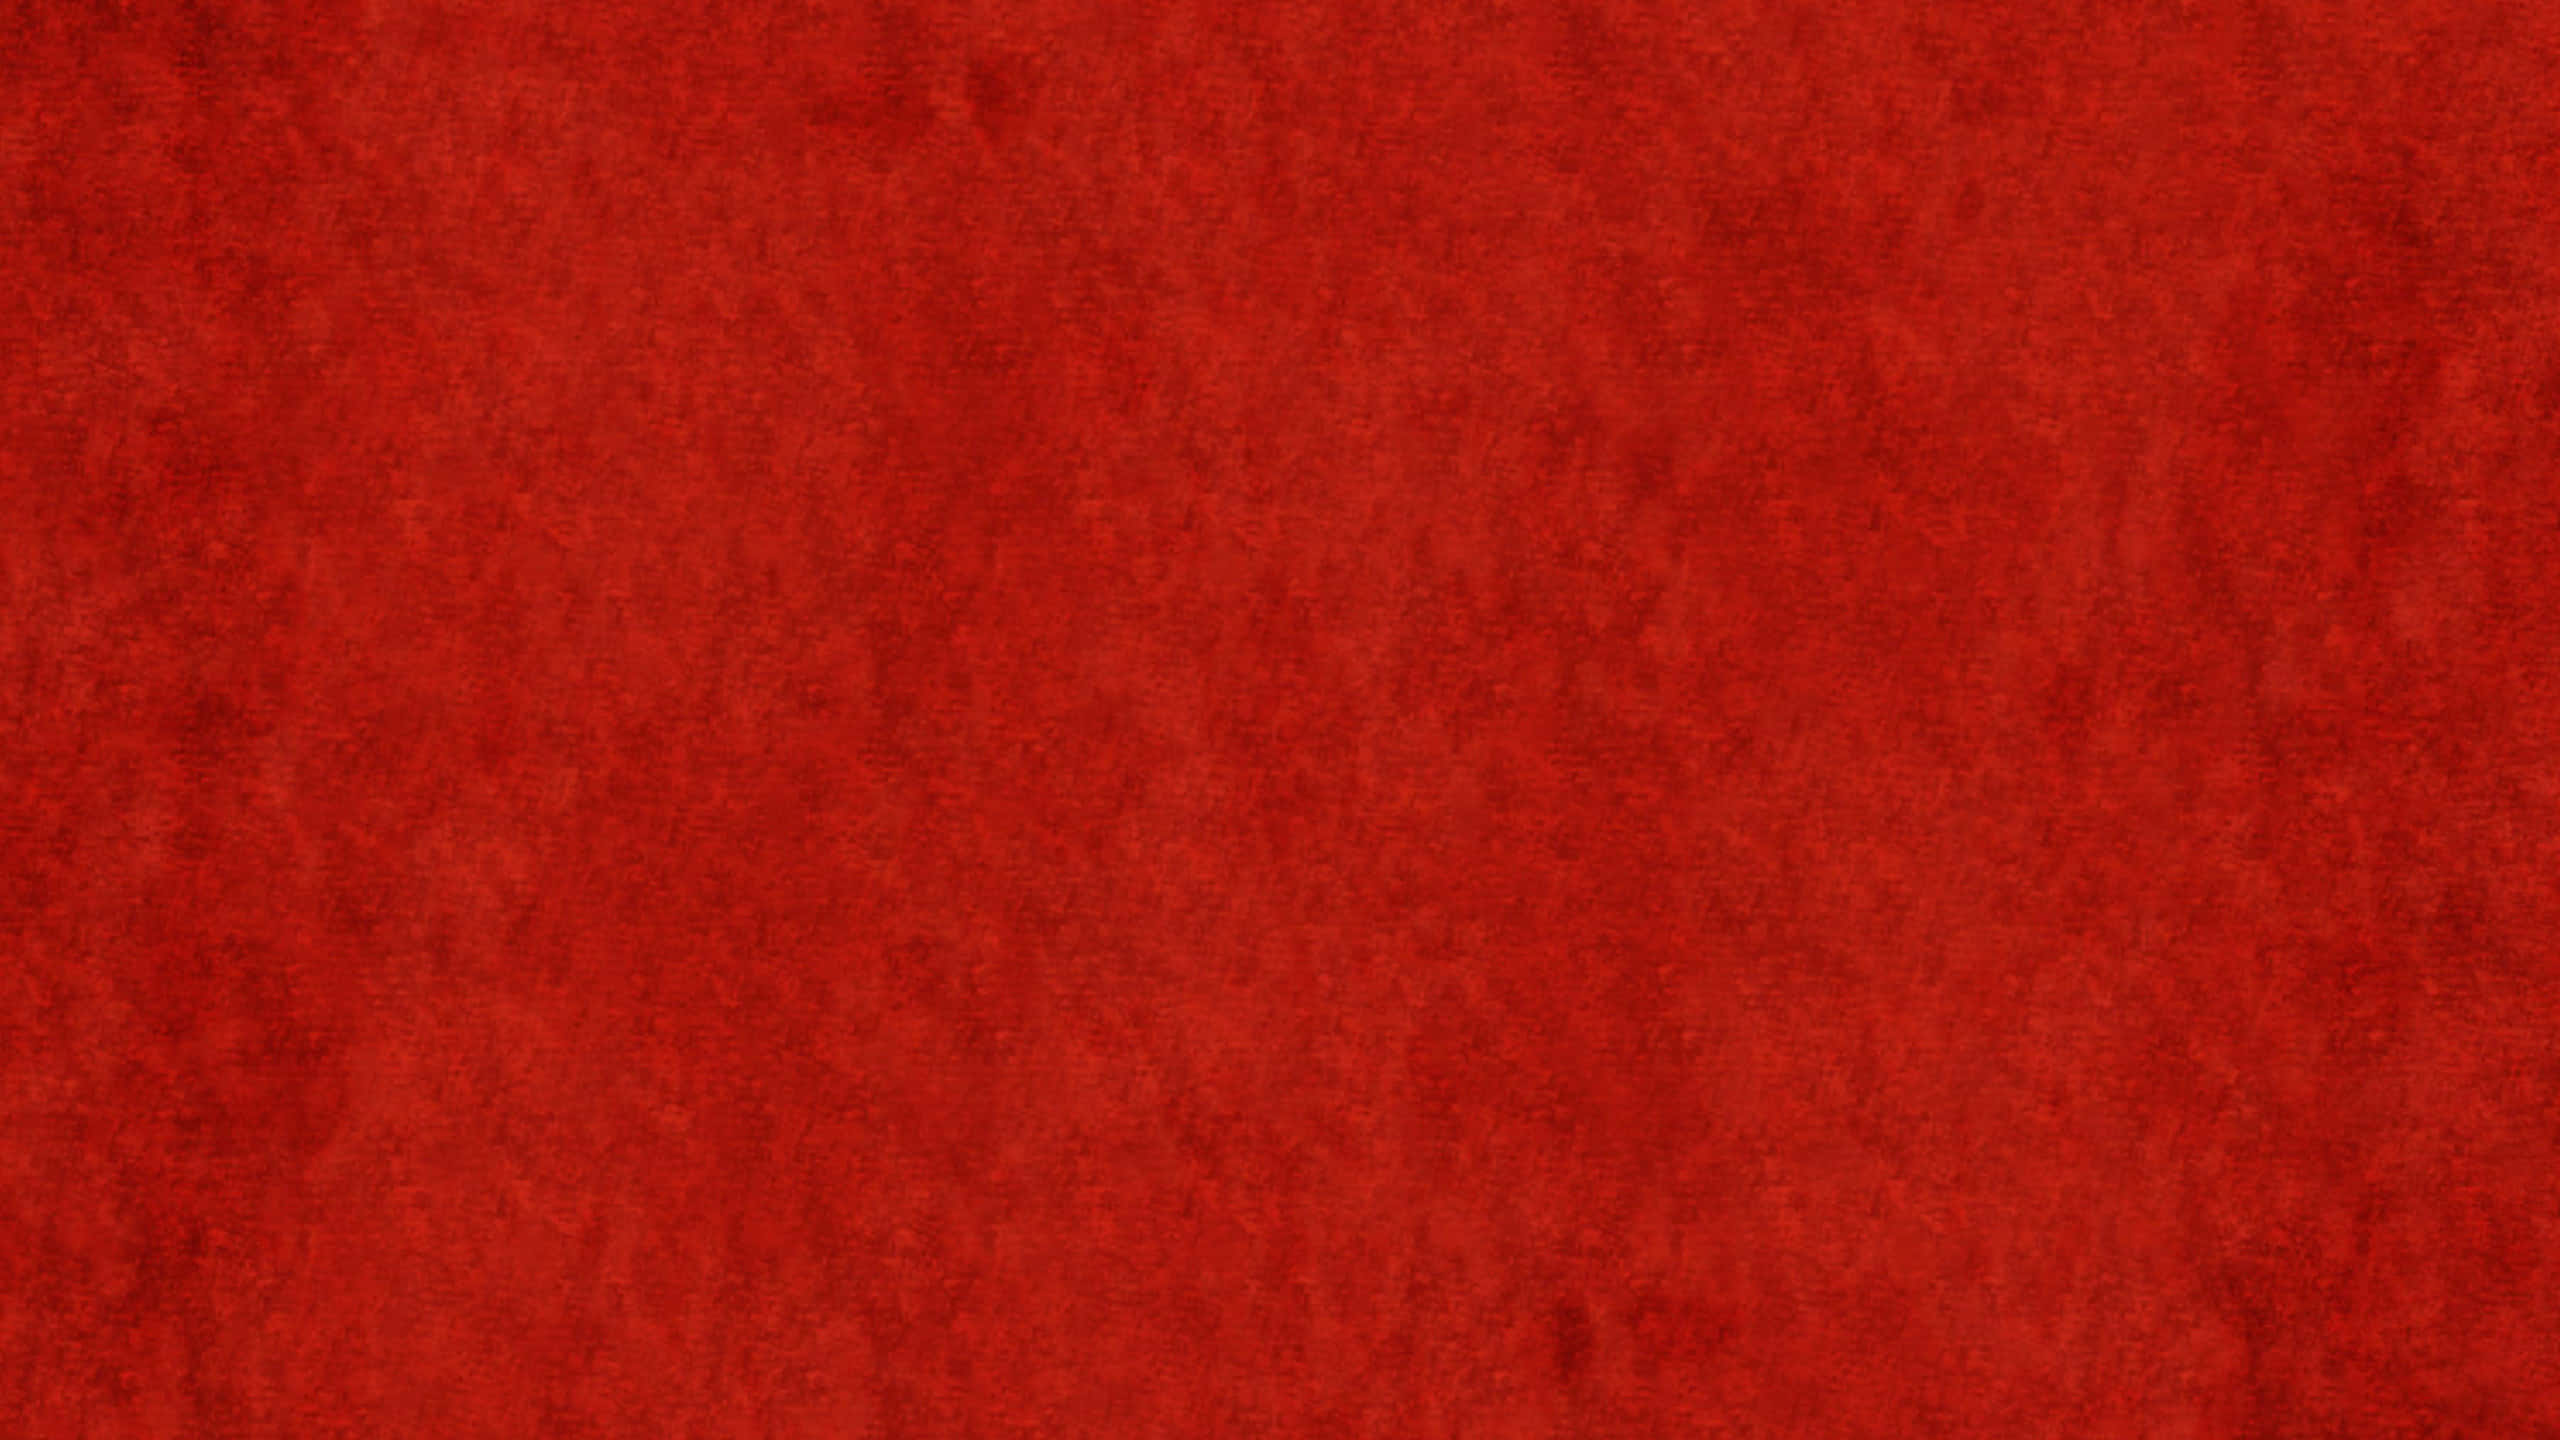 Solid Red Background Wallpaper